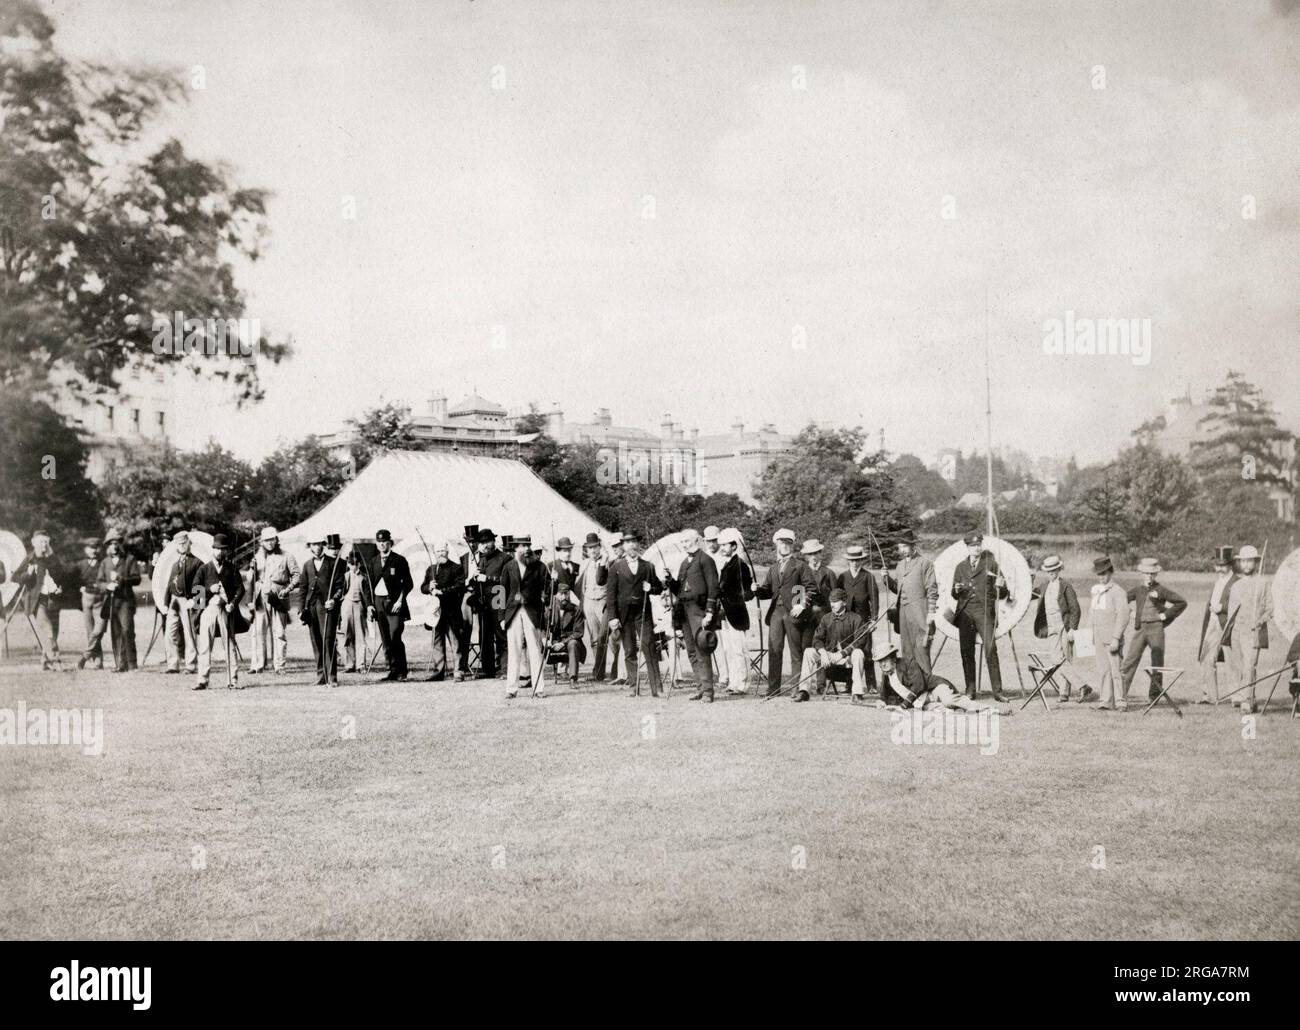 Vintage 19th century photograph: Very early image of an archery competition, competitors with bows and arrows, Leamington Spa, 1870 Stock Photo